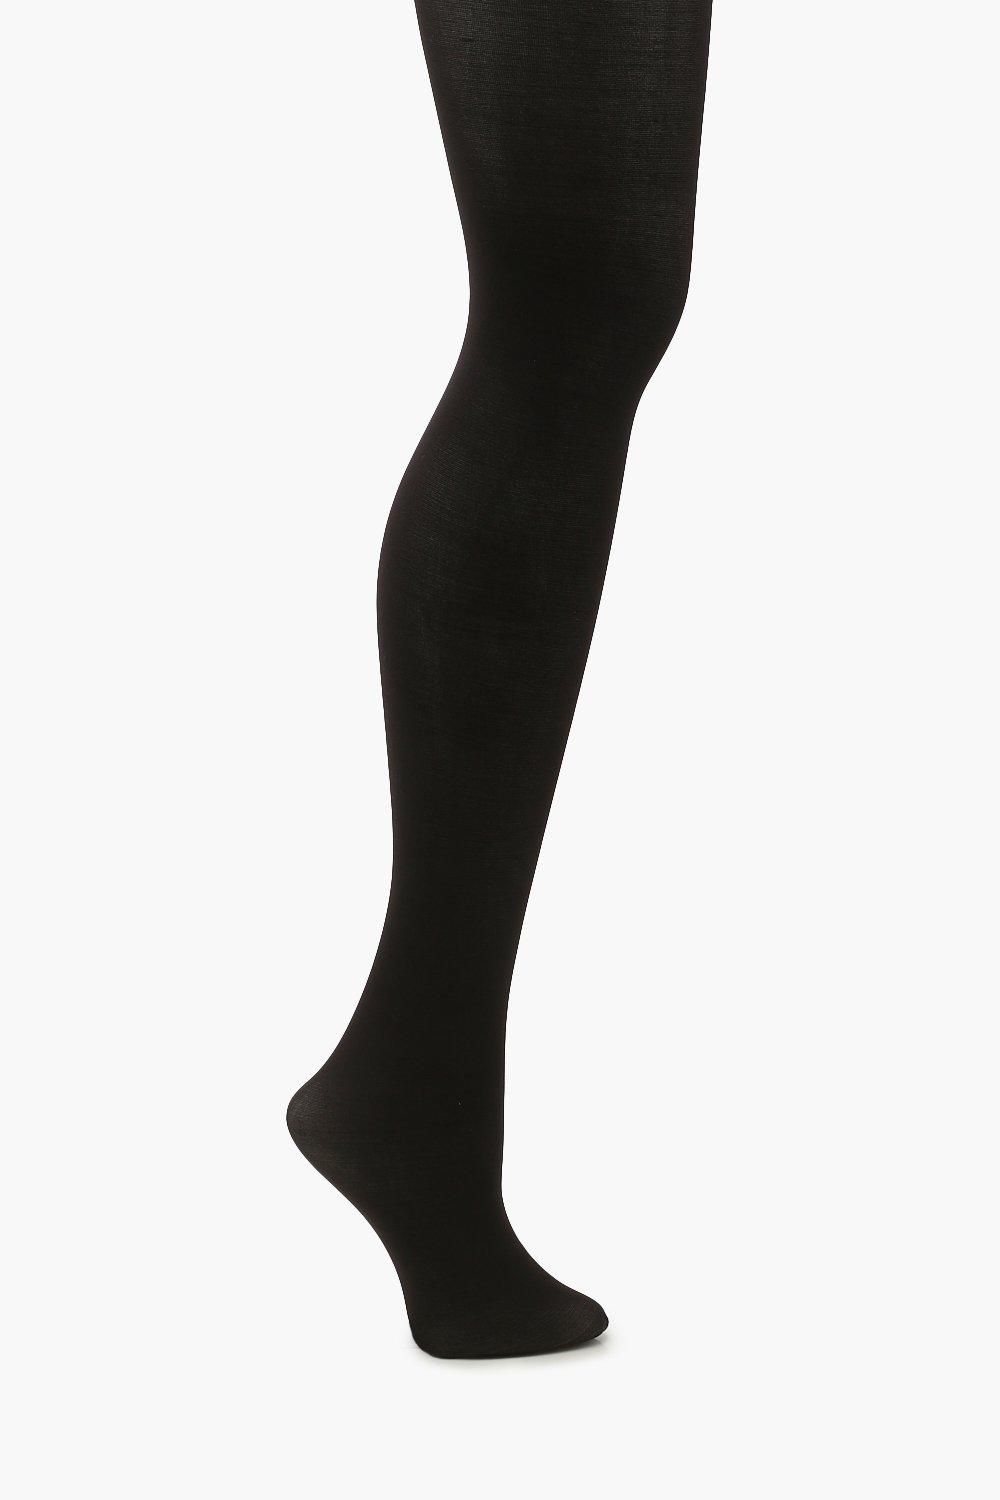 Black 2 Pack Women Plus Size Opaque Microfiber Tights UK size 18 - 22